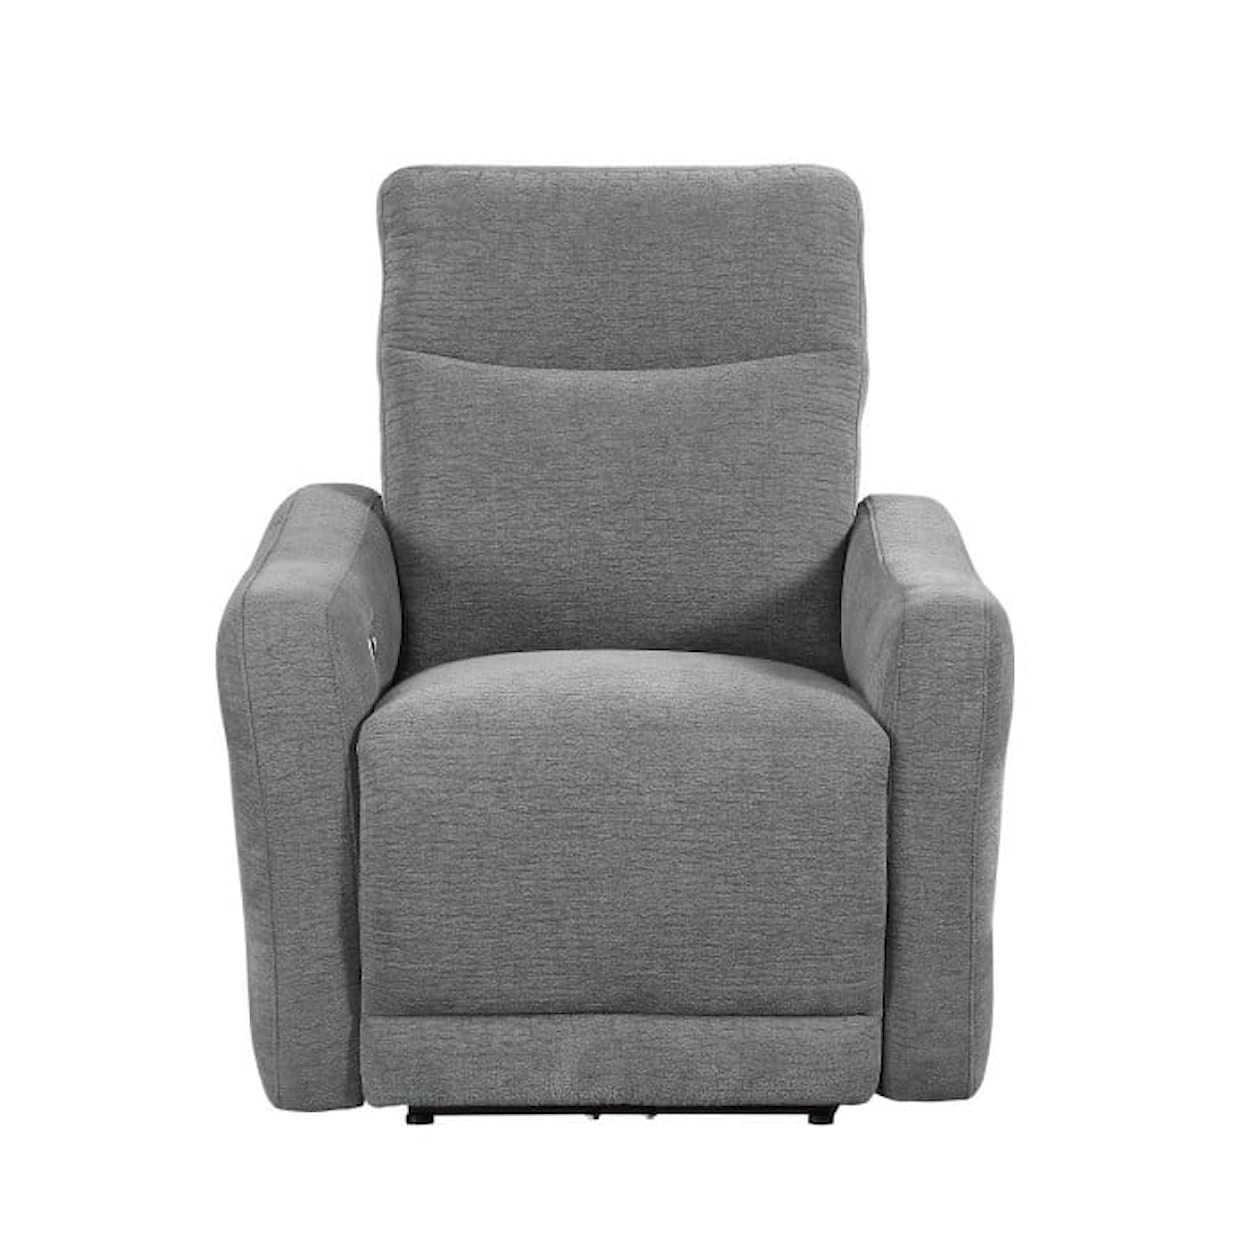 Homelegance Edition Lay Flat Reclining Chair